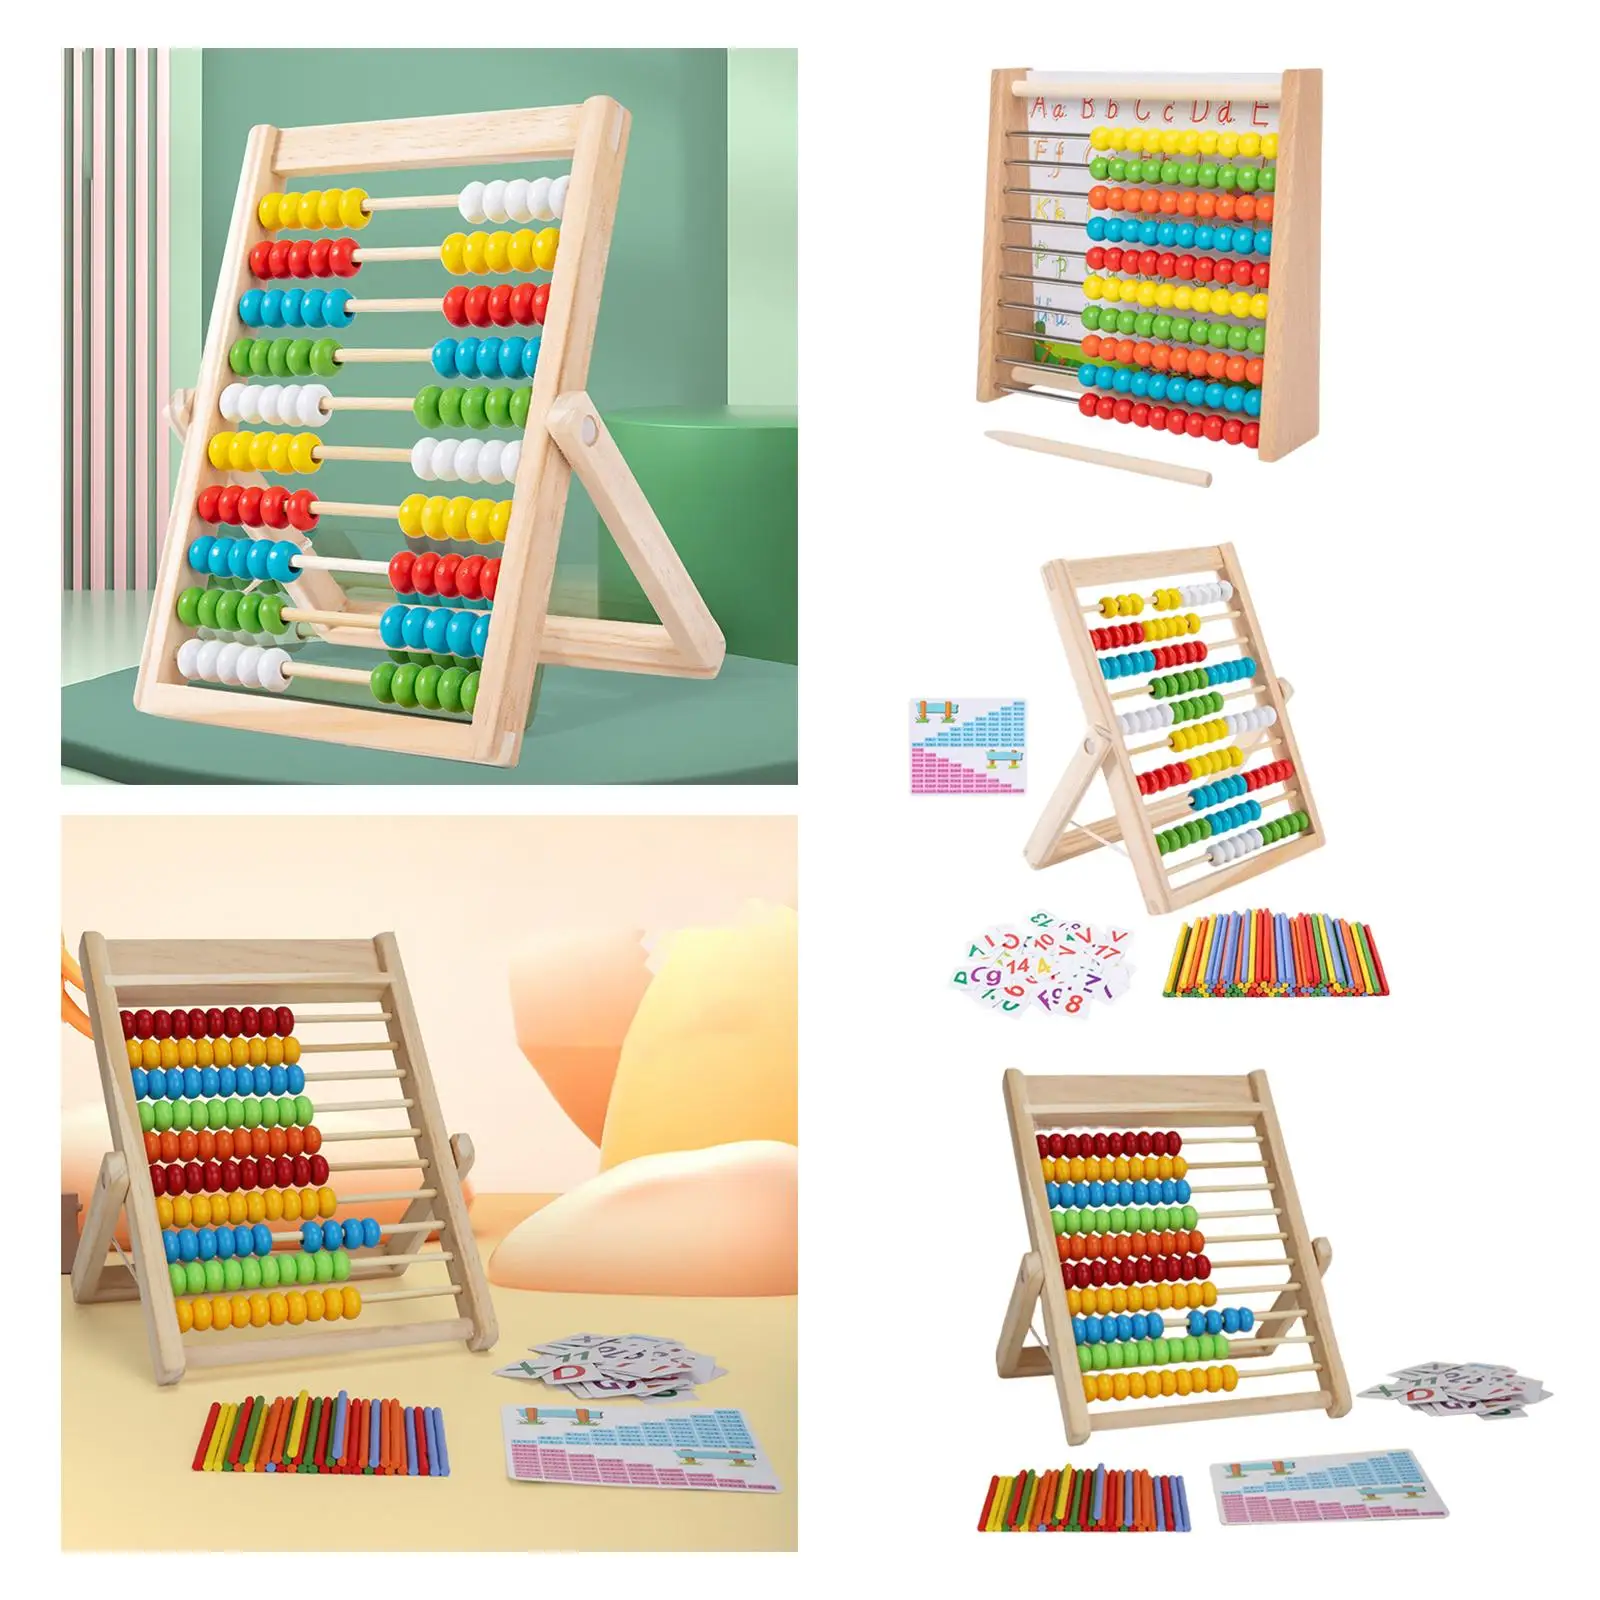 Montessori Math Toys Math Learning Toy Abacus Thinking Game 10 Rows Abacus for Preschool Children Toddlers Boys Gifts